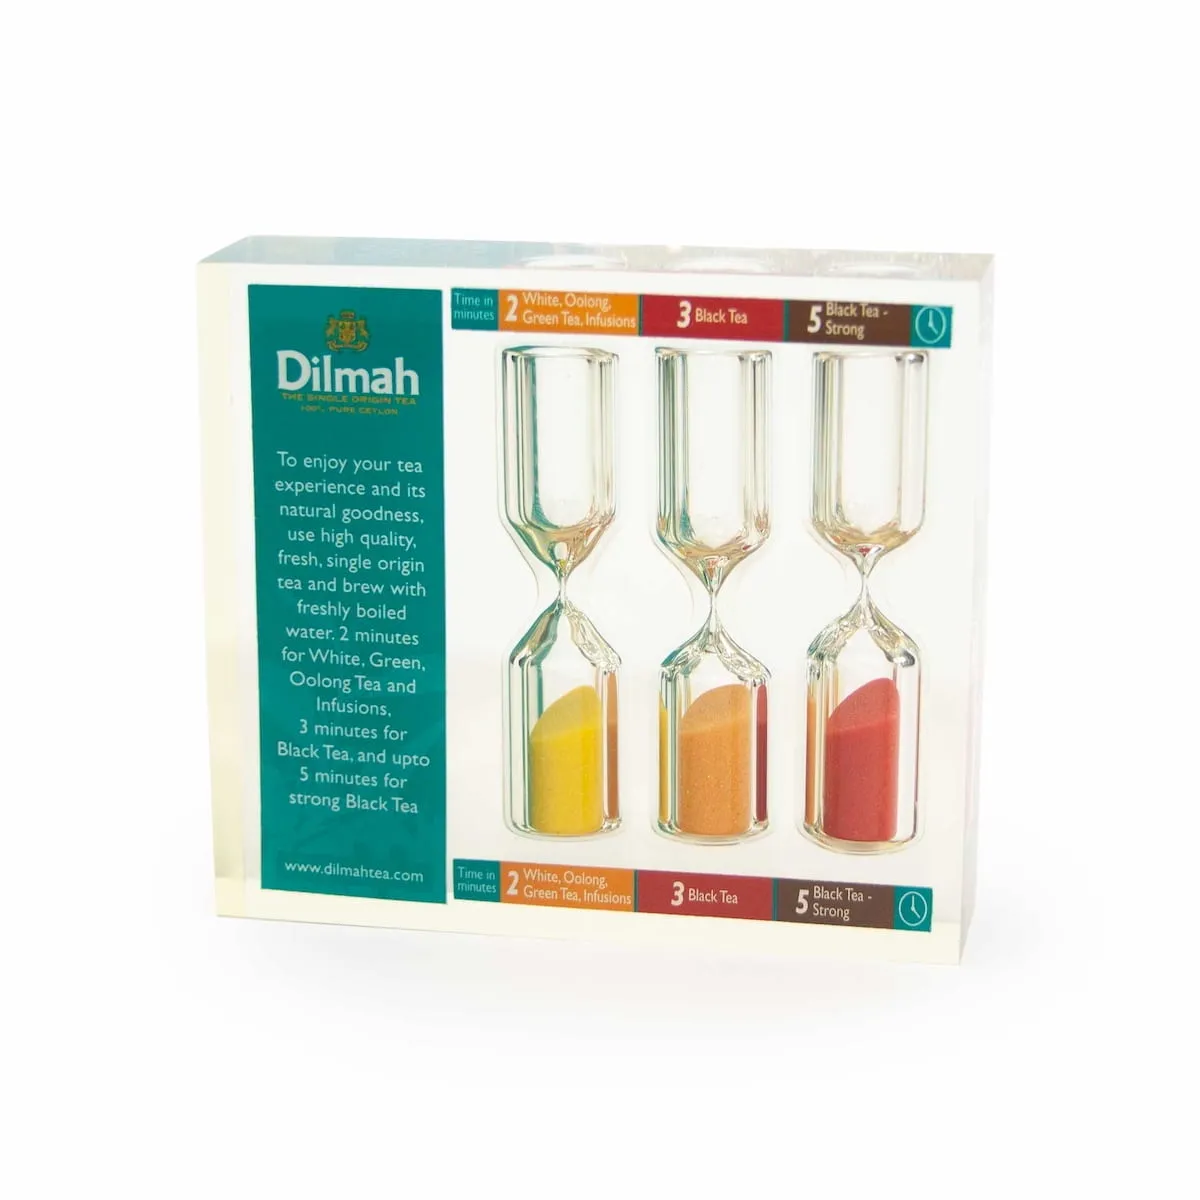 Dilmah tea timer with three hourglasses of 2, 3, and 5 minutes